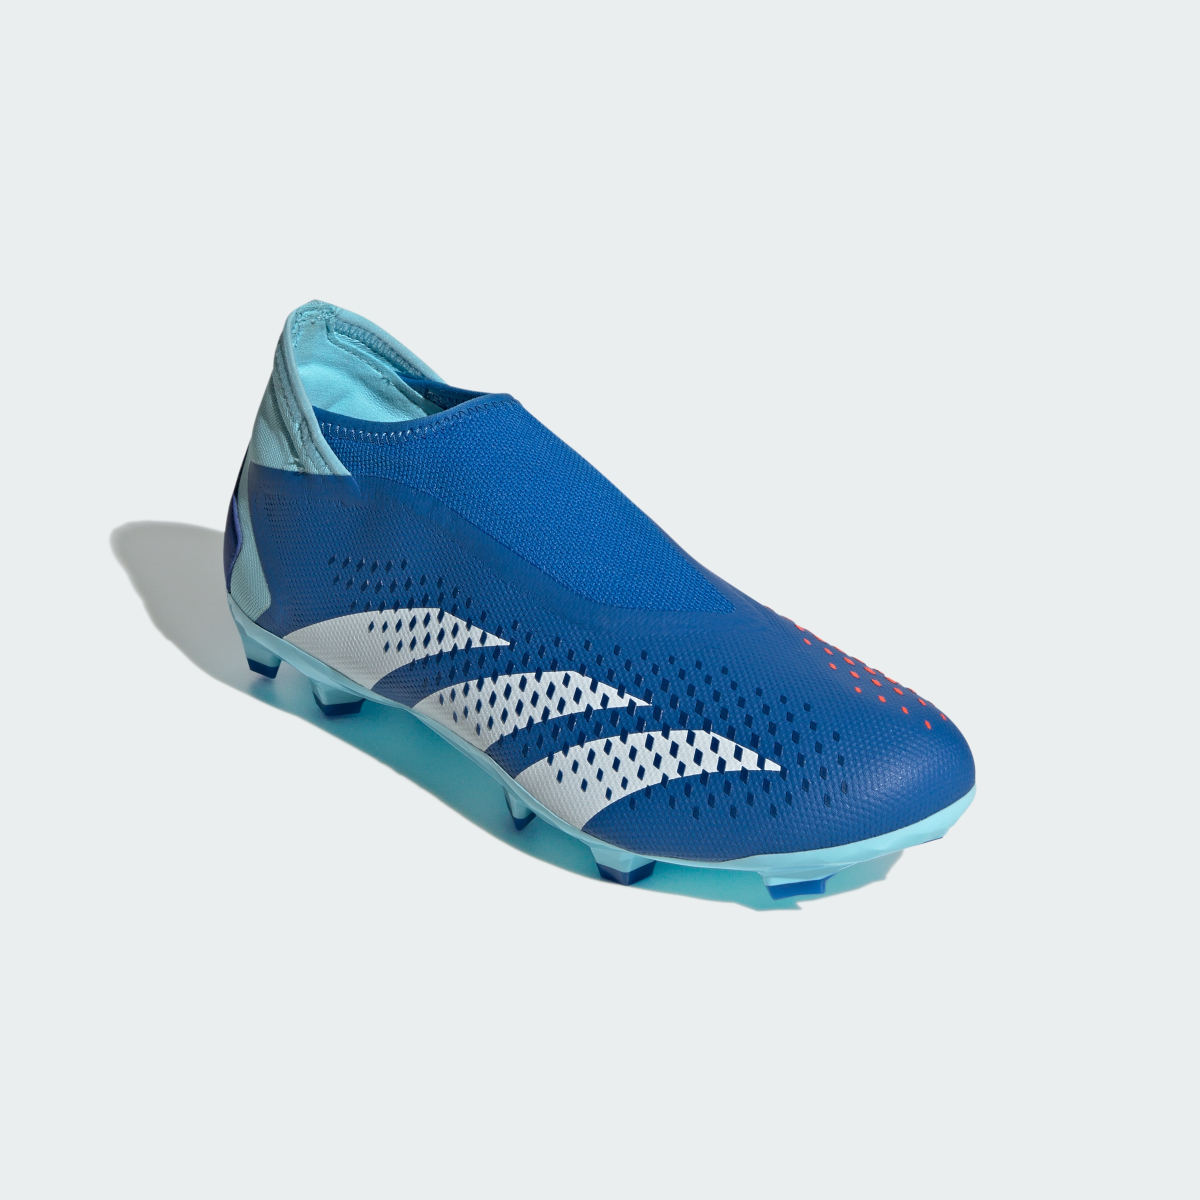 Adidas Predator Accuracy.3 Laceless Firm Ground Boots. 5